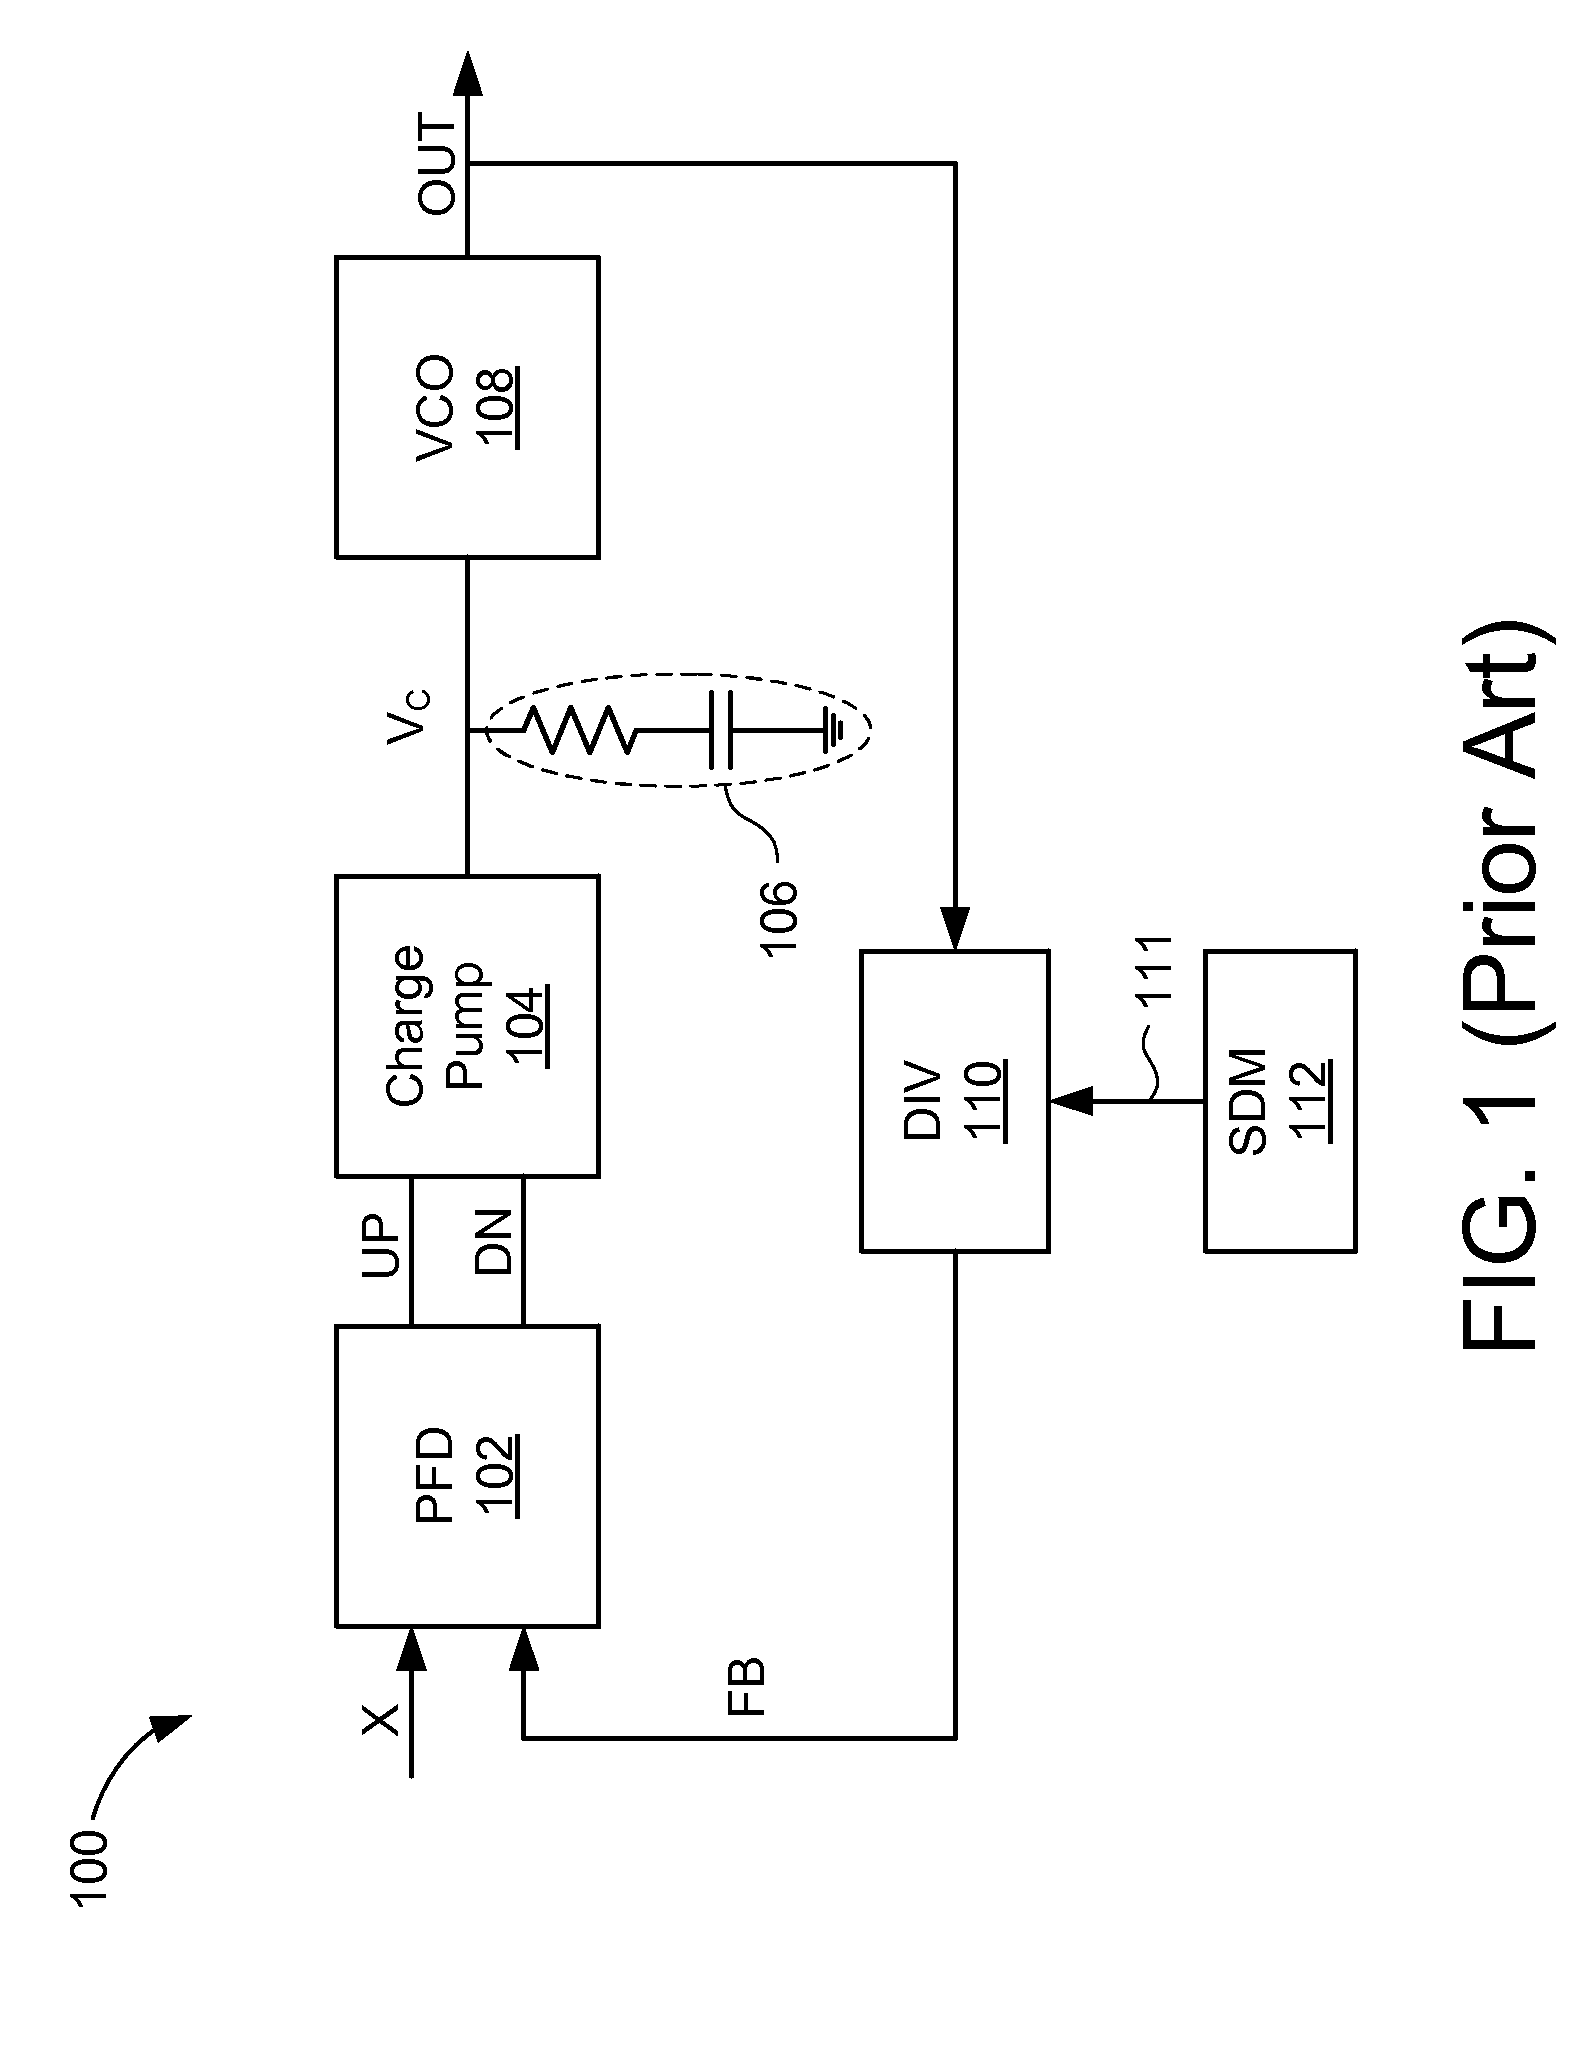 Method and apparatus for generating a reference signal for a fractional-N frequency synthesizer